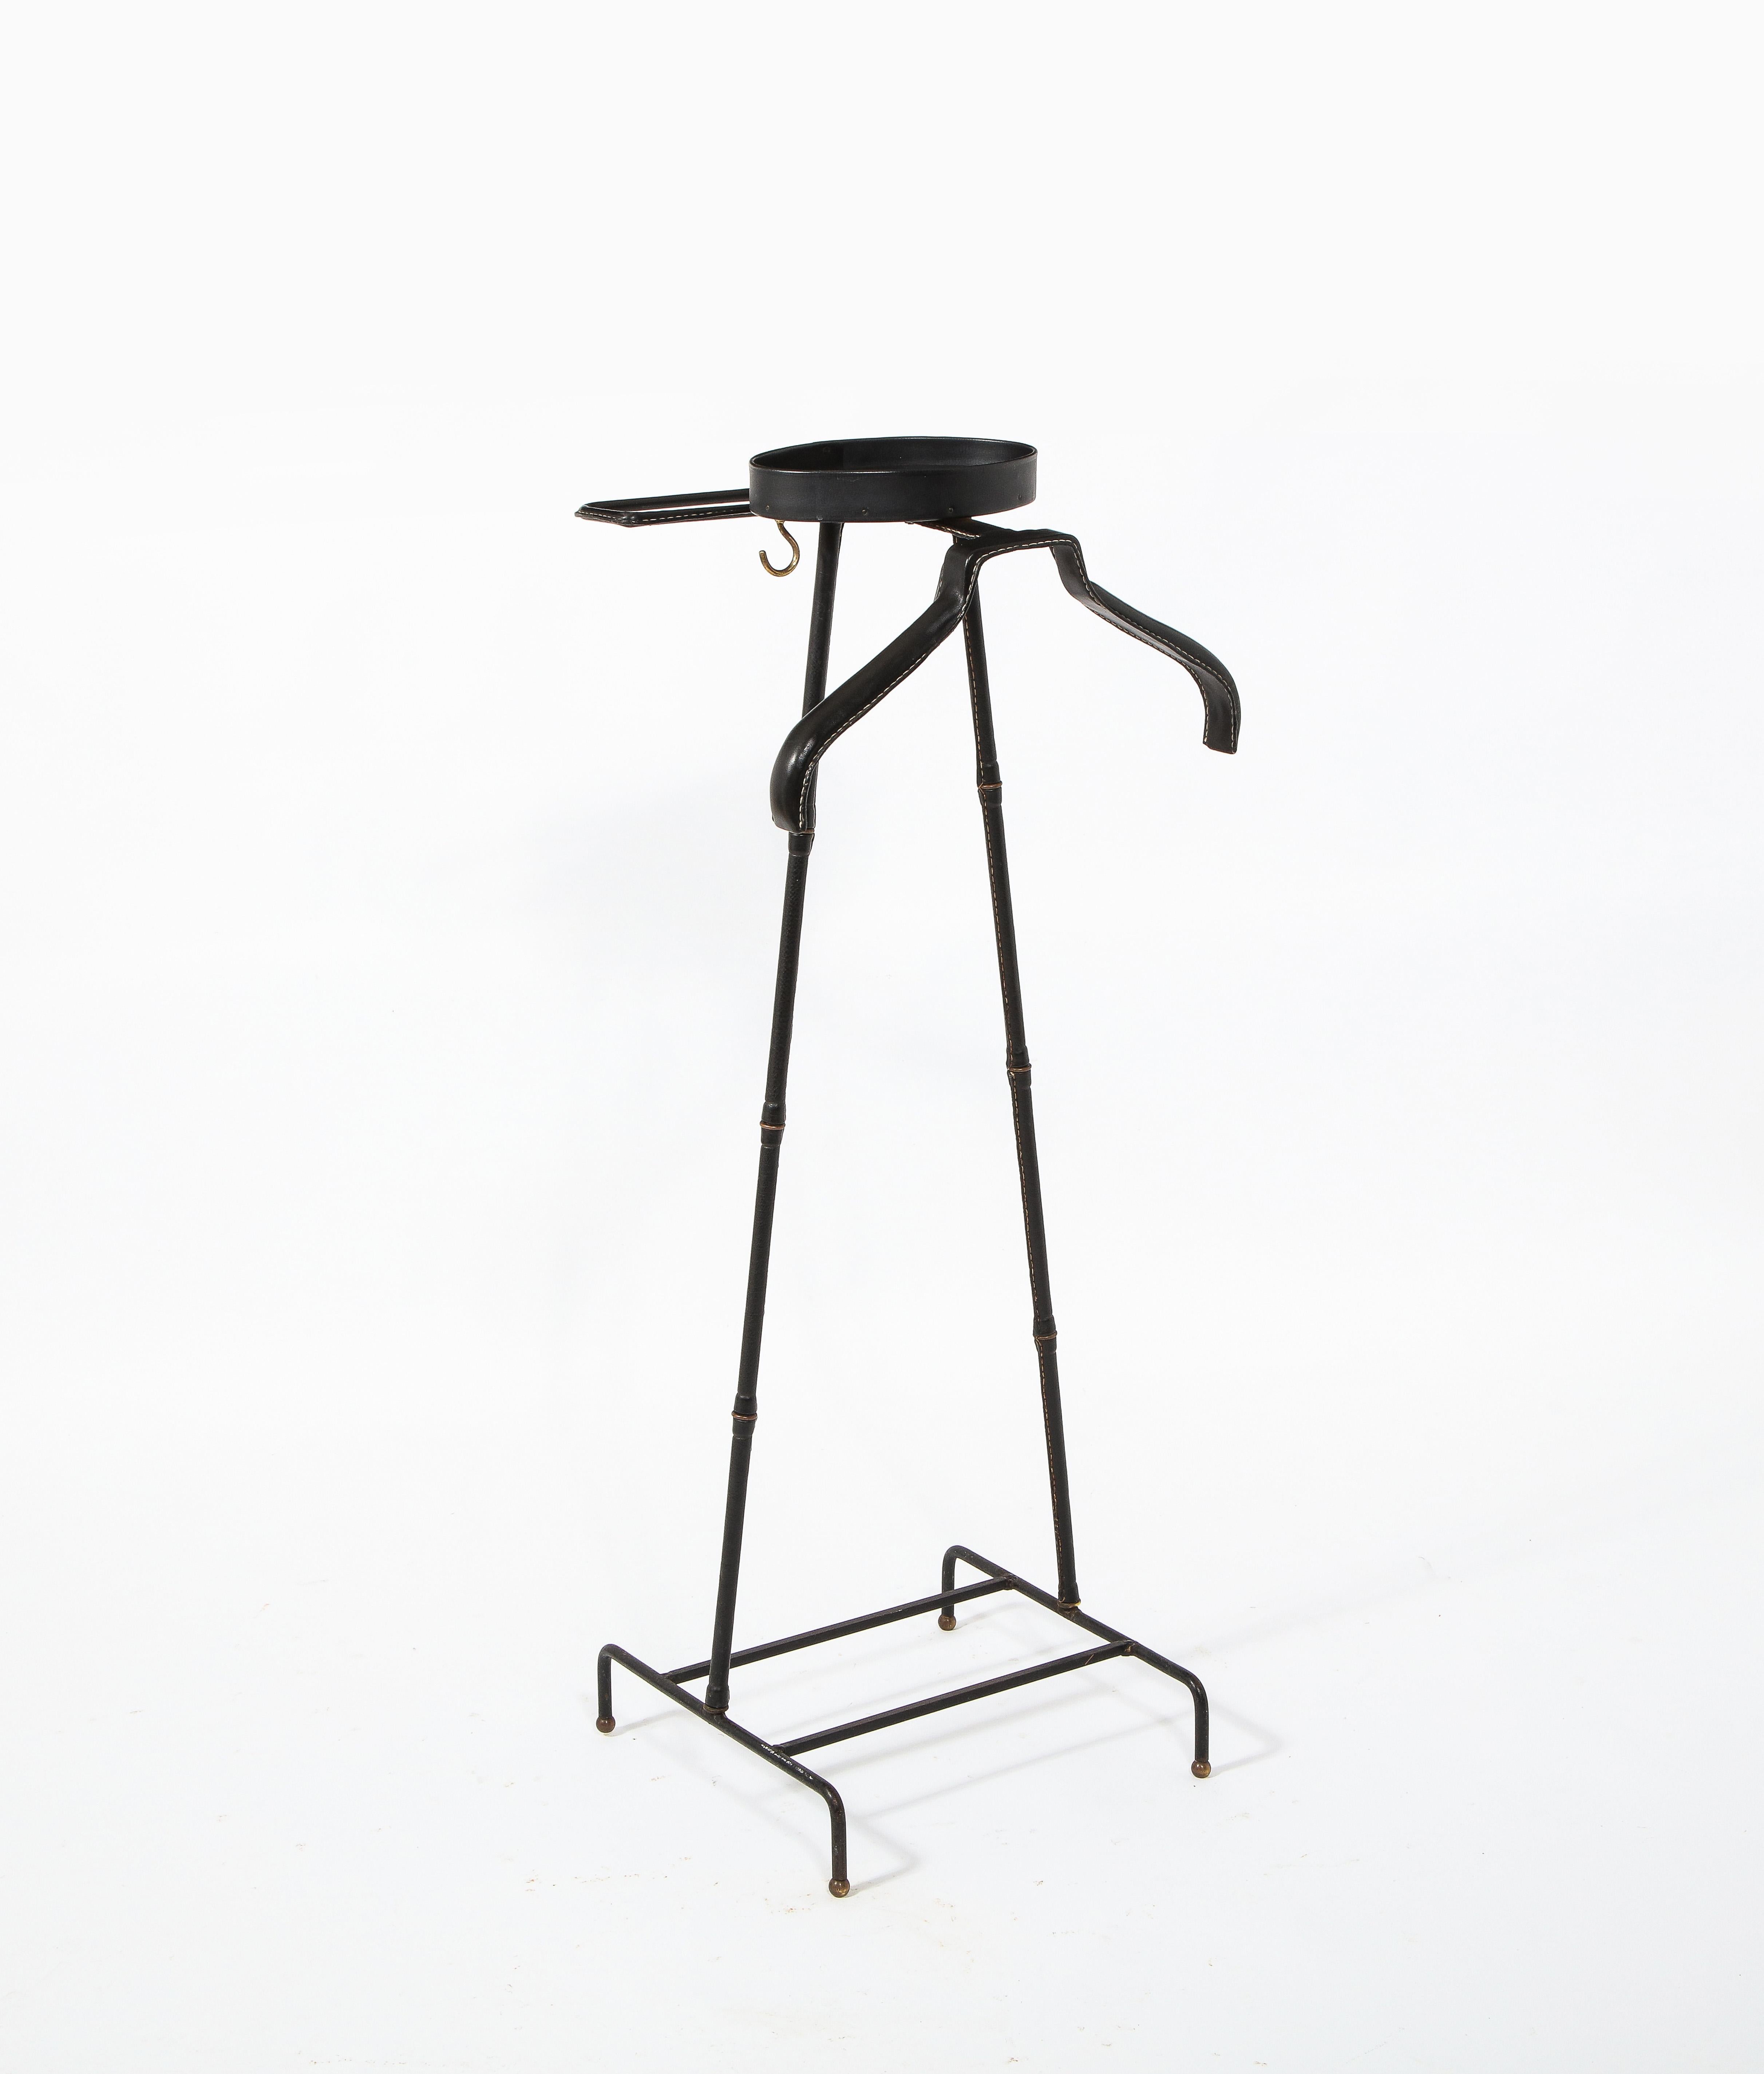 Brass Stitched Leather Valet Stand by Jacques Adnet, France 1960's